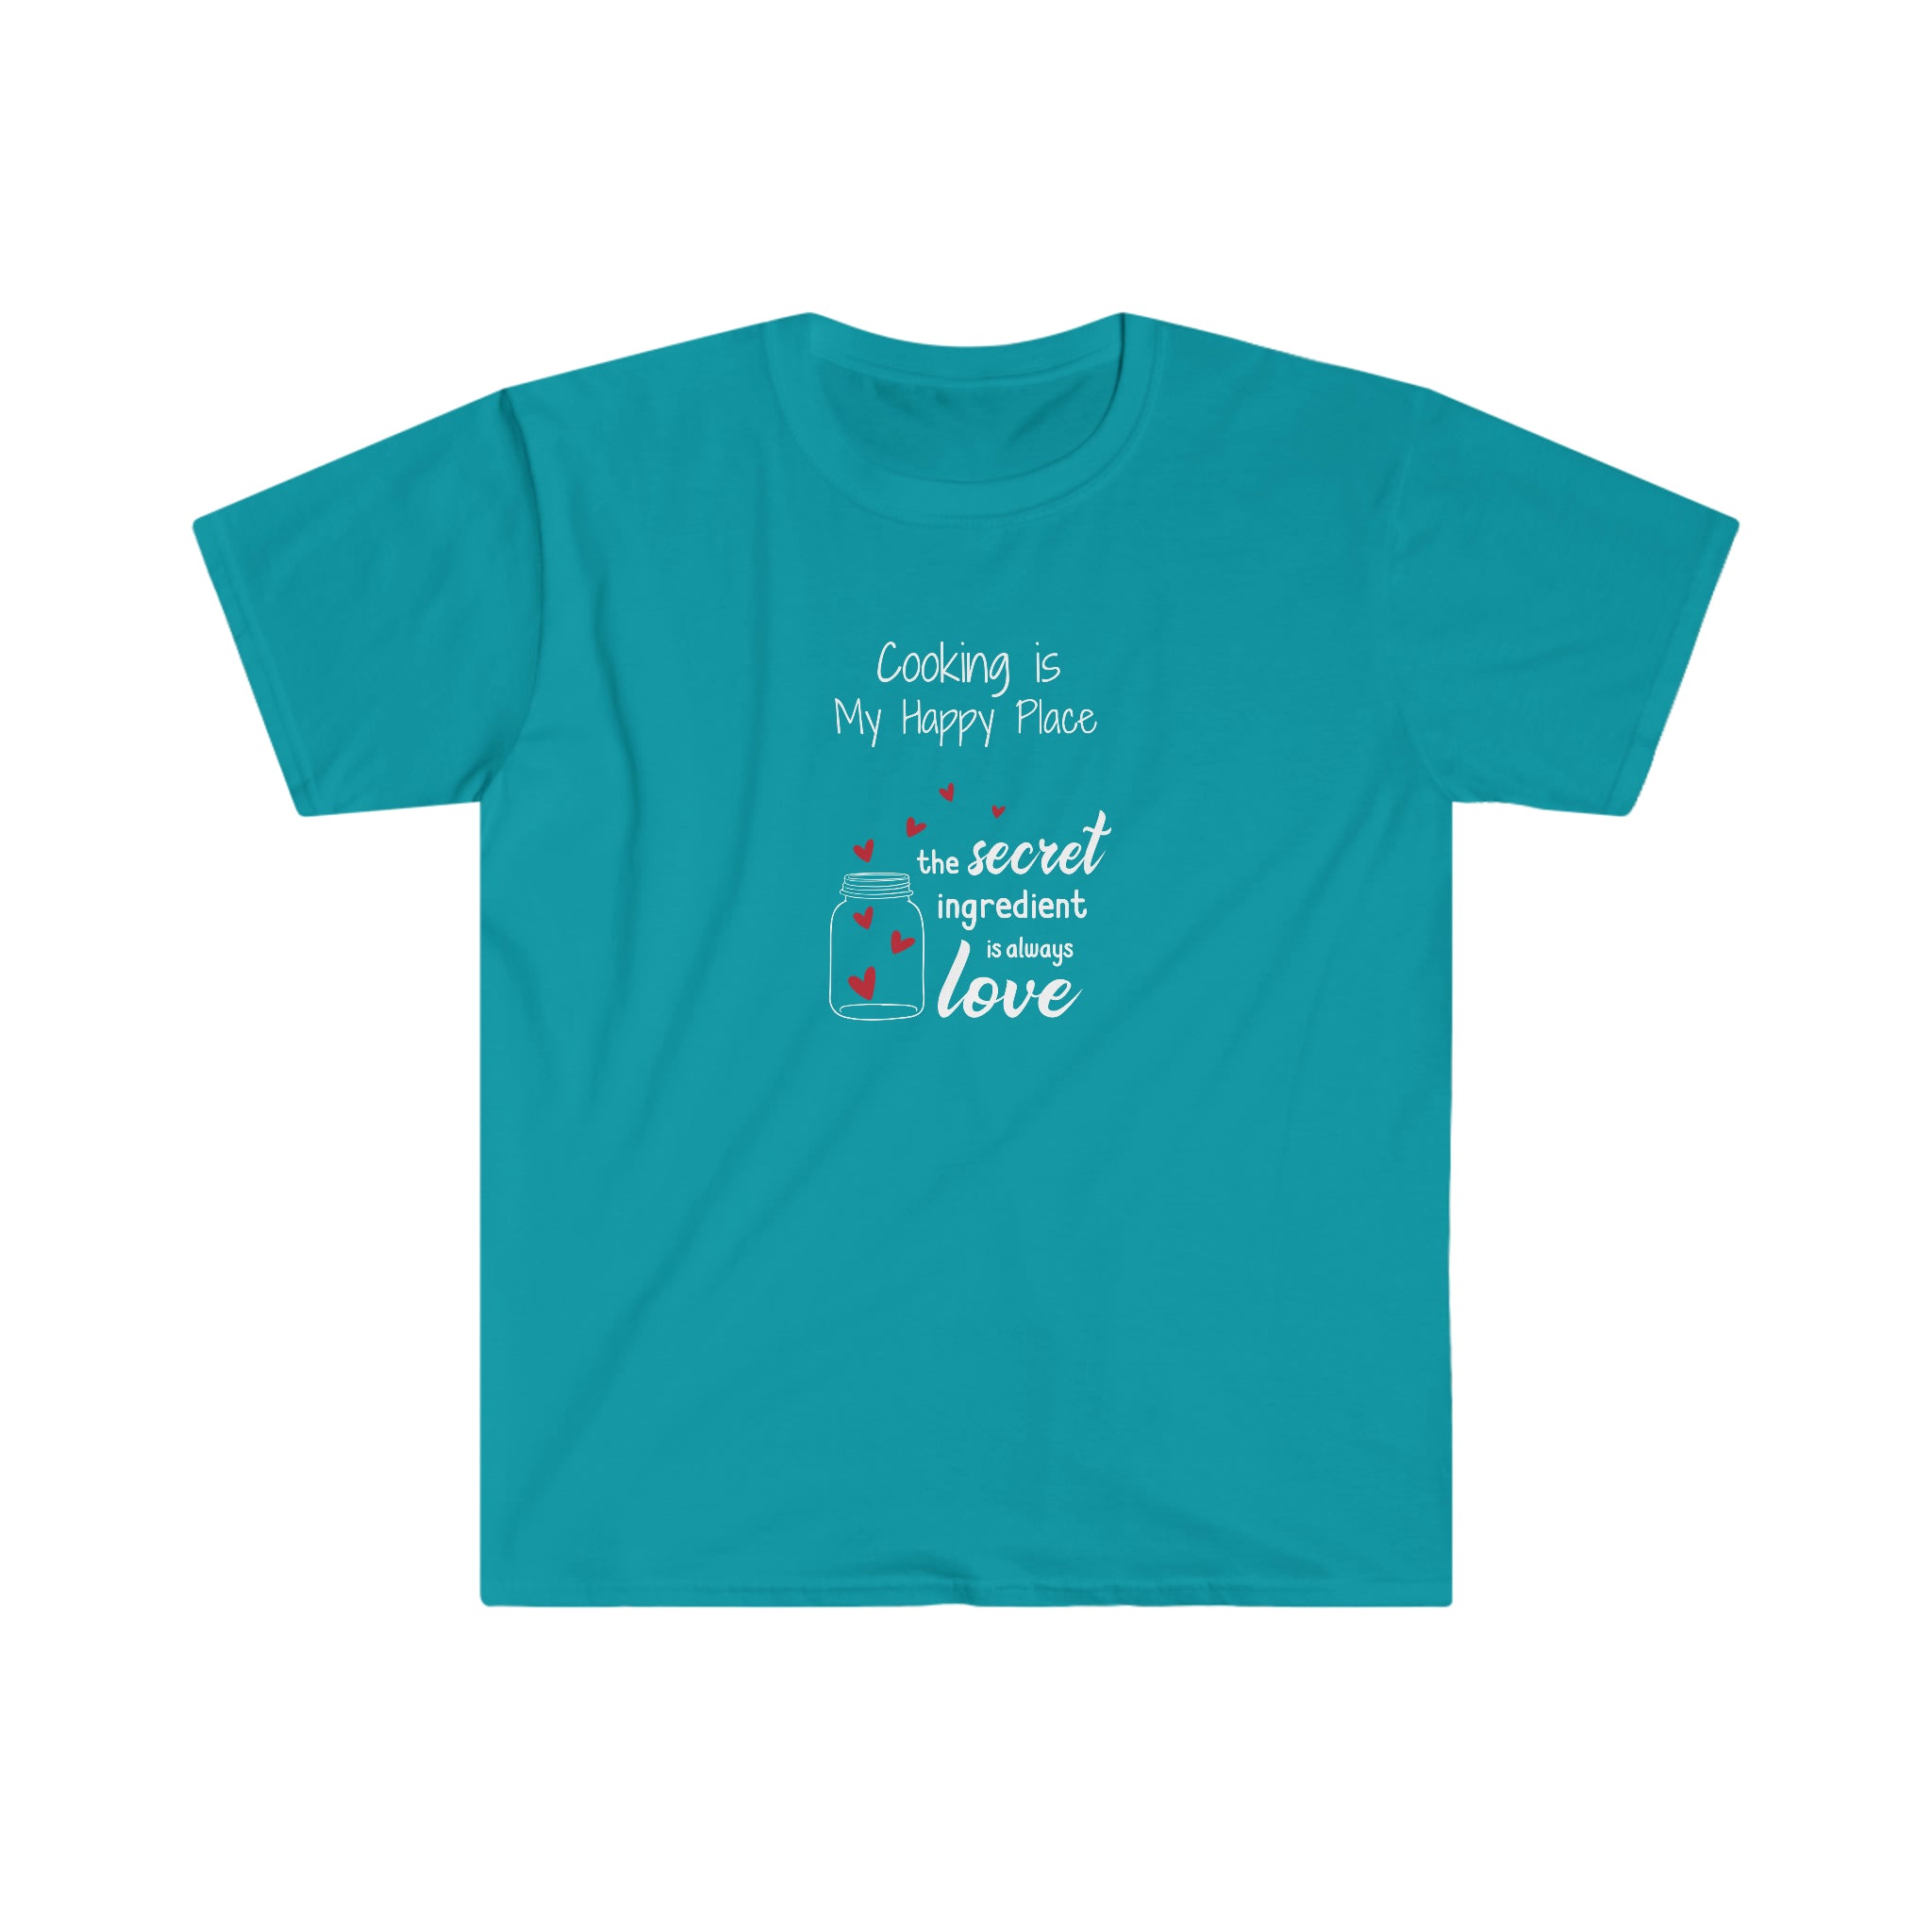 T-shirt, super soft, "Cooking is My Happy Place" T-Shirt - Comfortable, Chic and Playful - cooking t-shirt #12